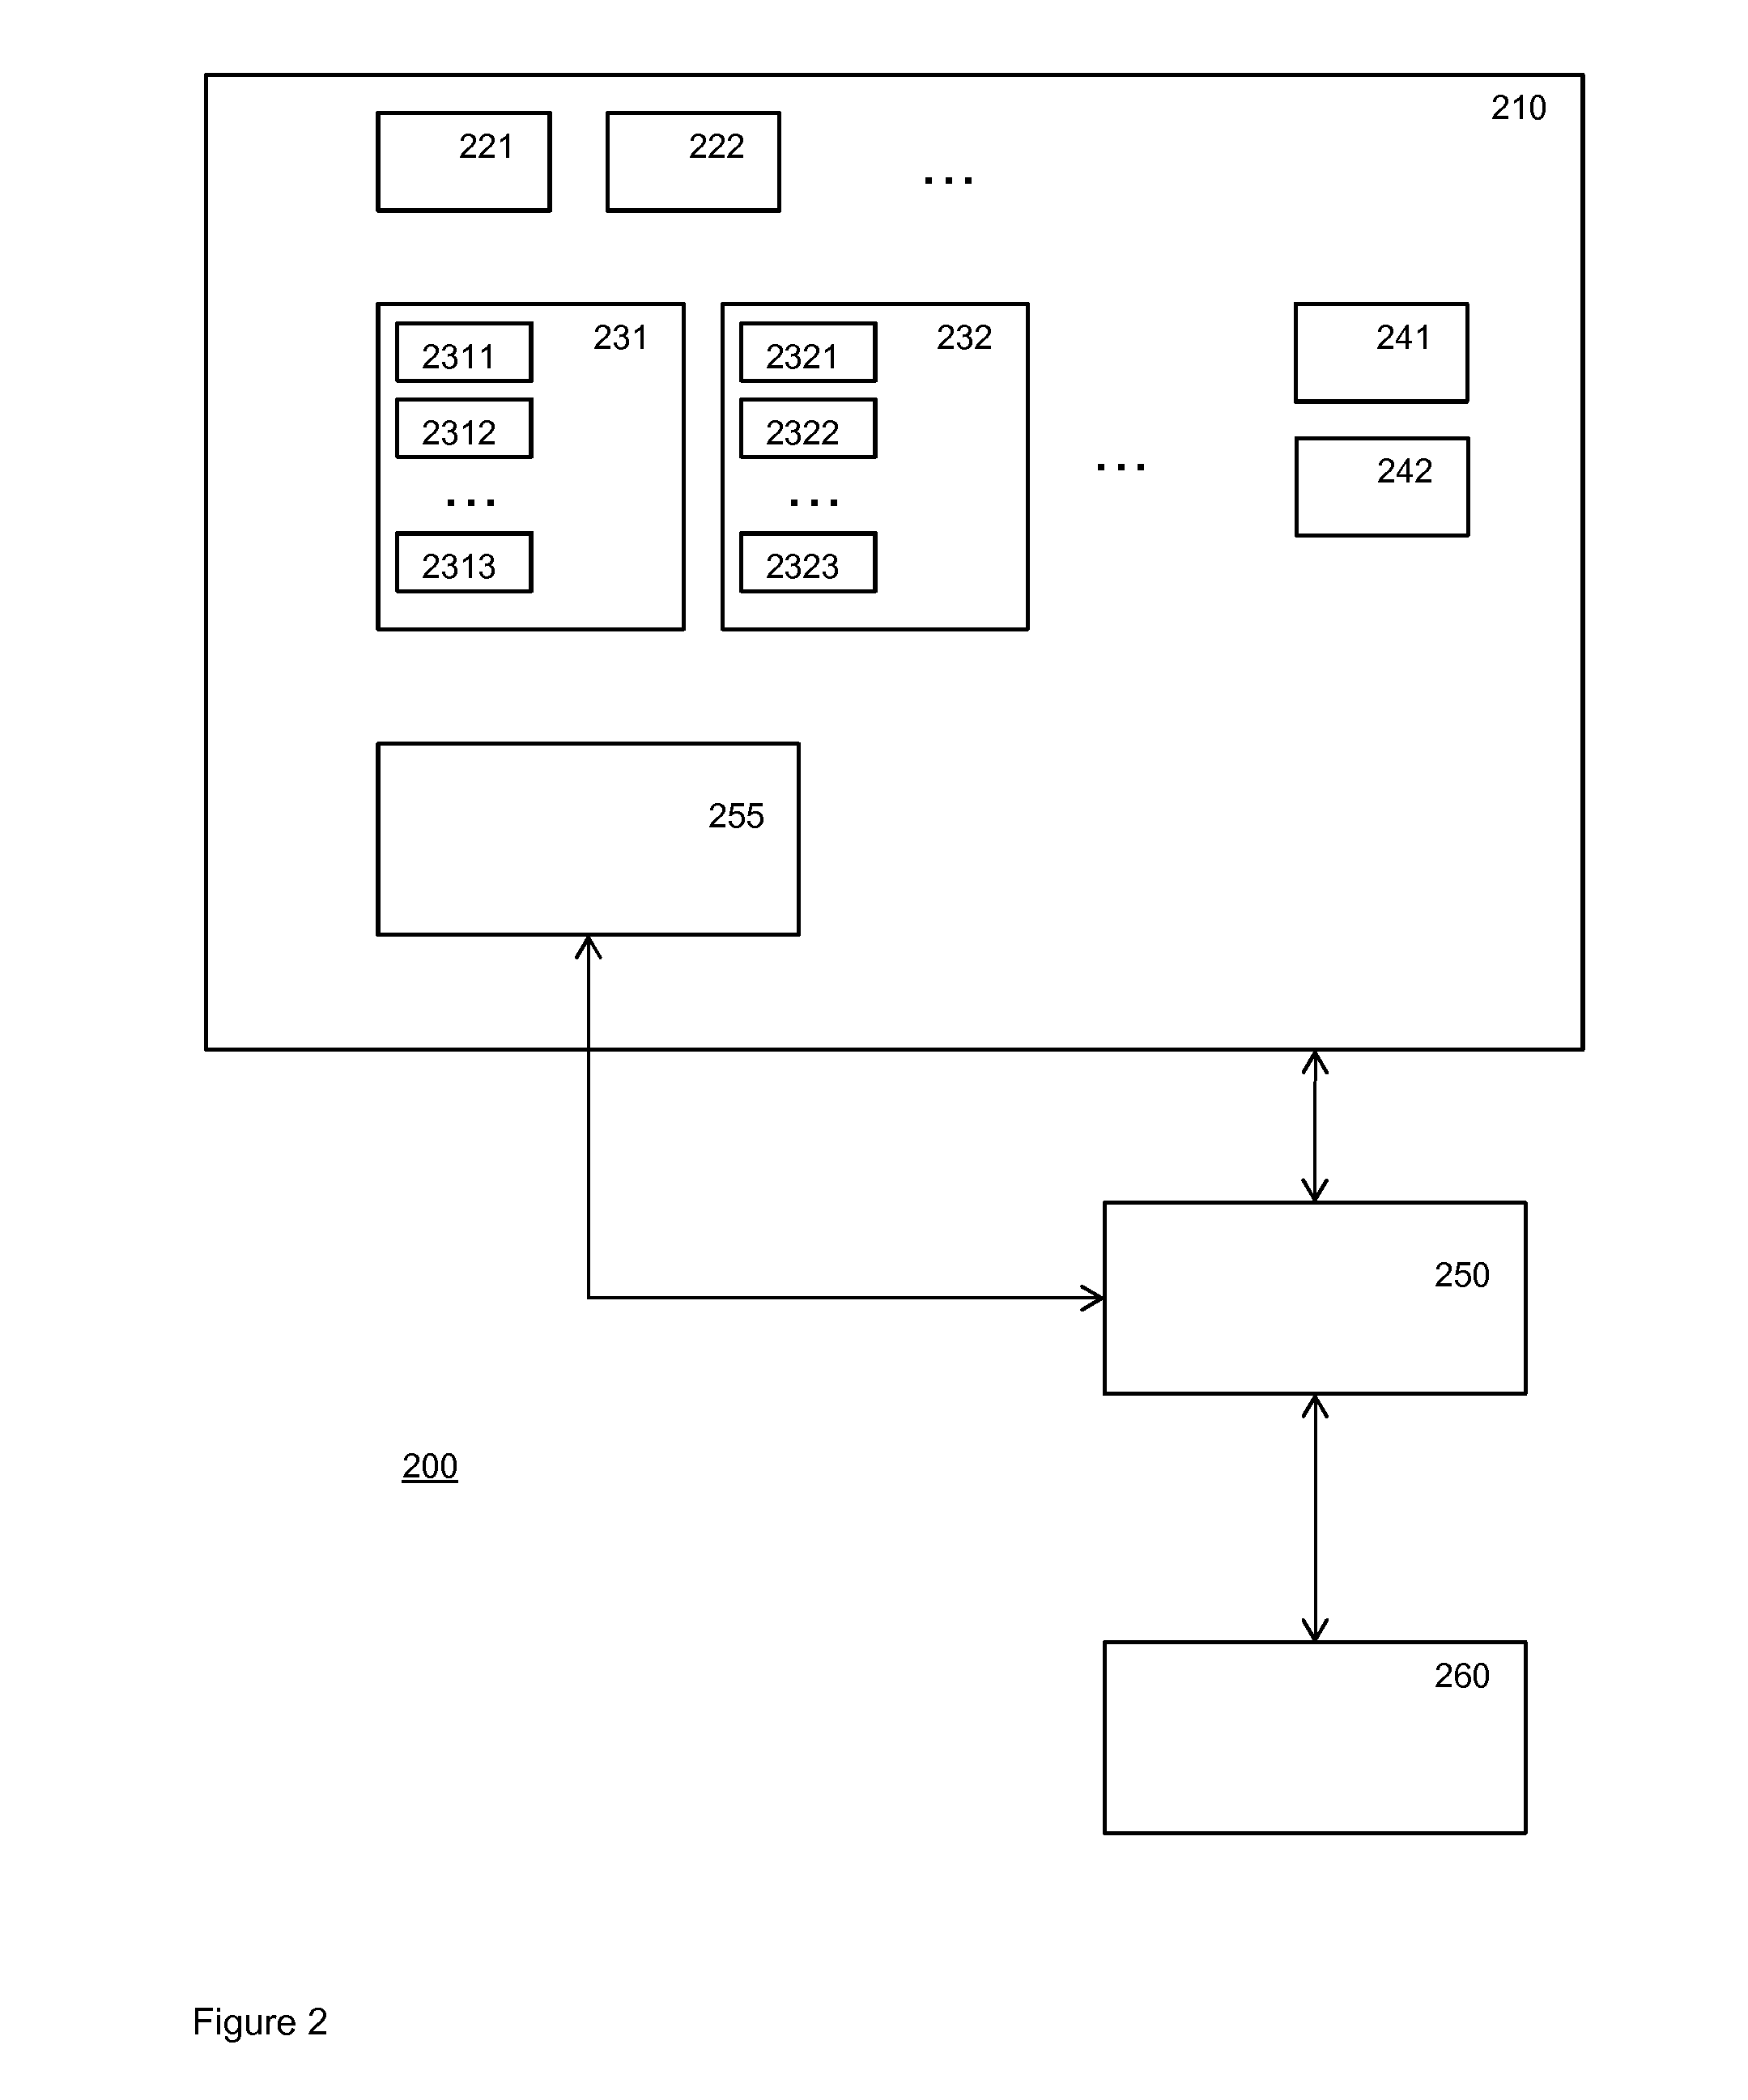 Computing device storing look-up tables for computation of a function